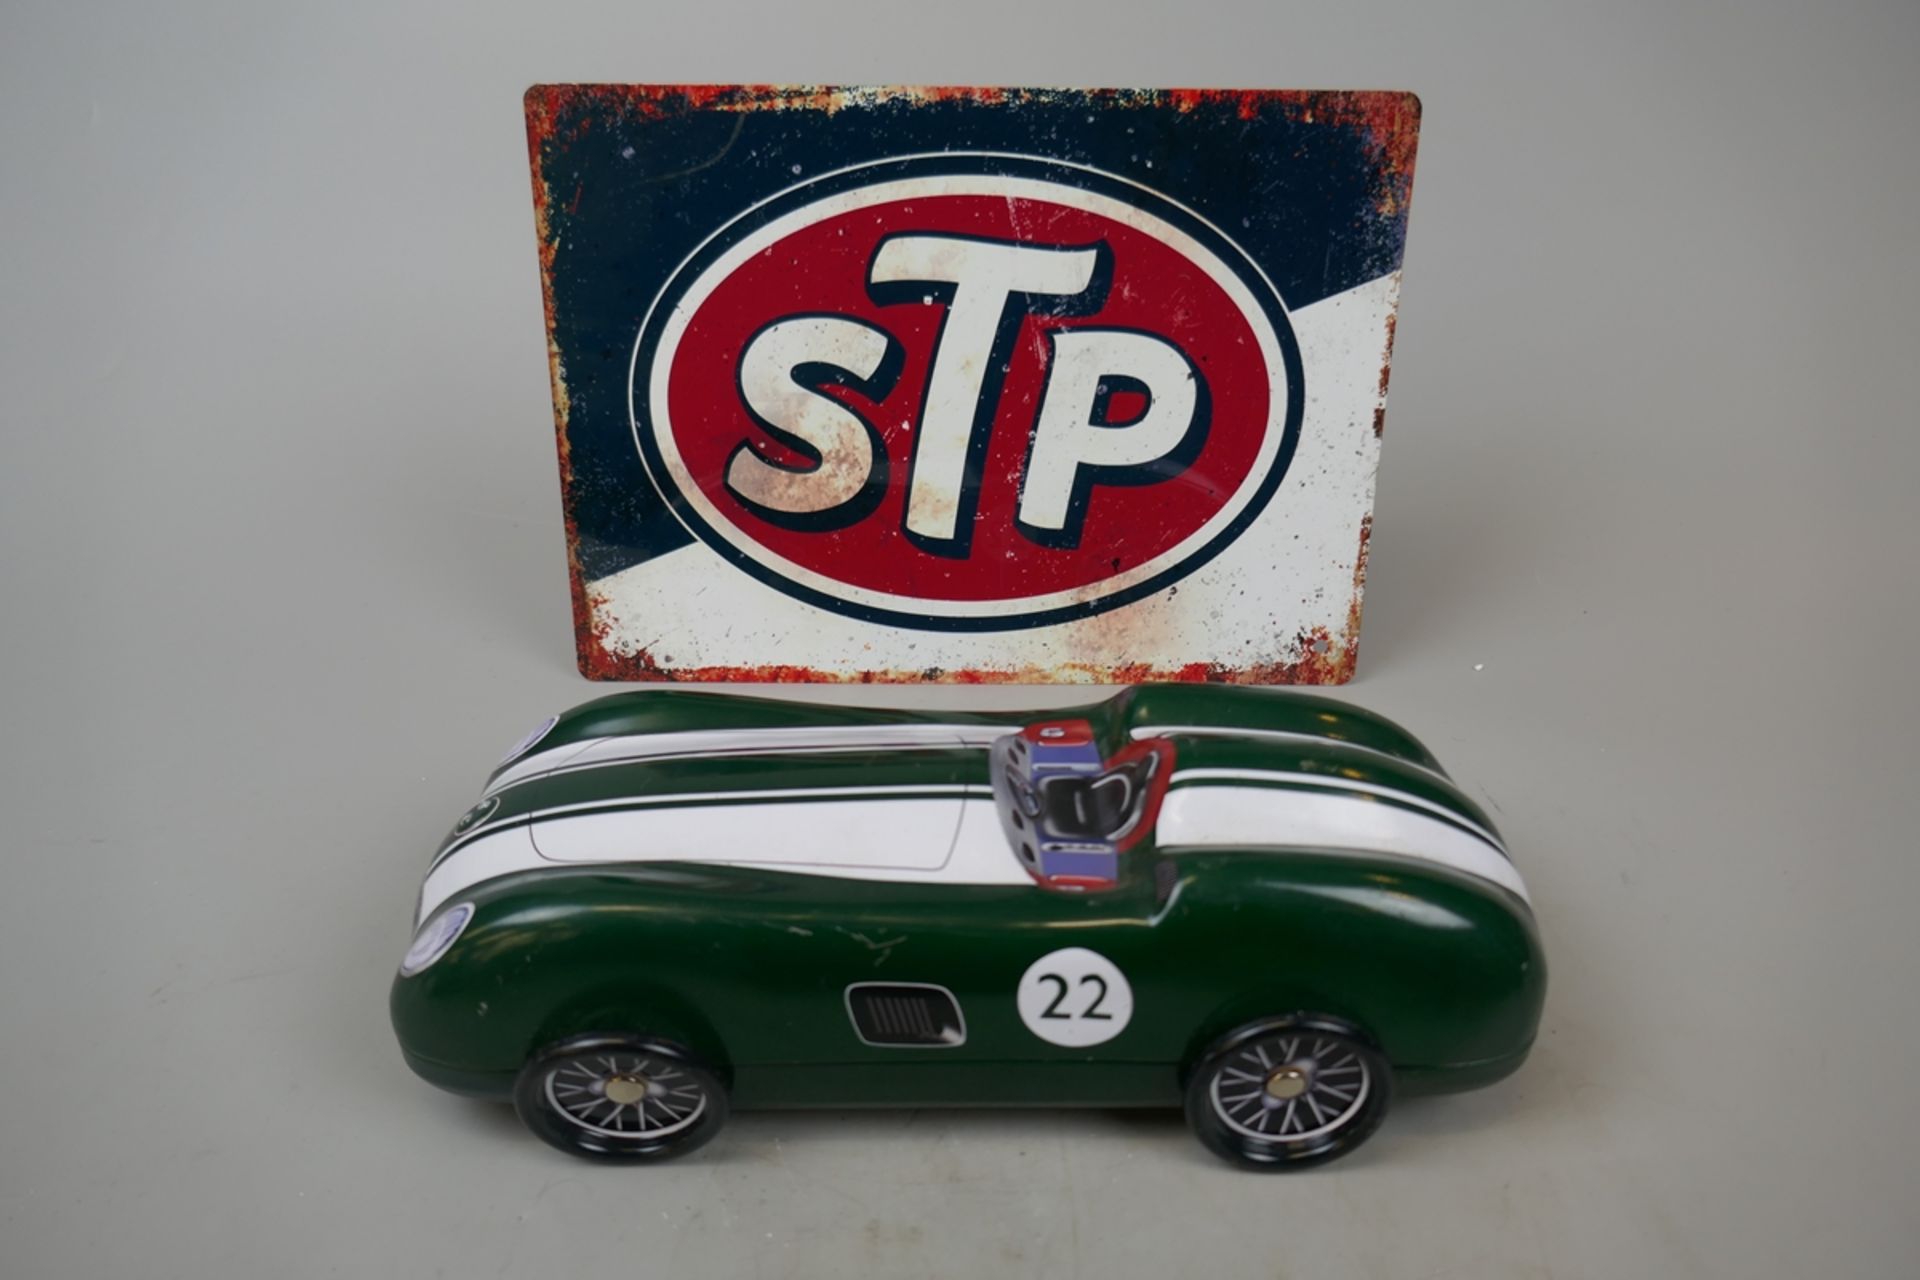 STP sign together with a model car